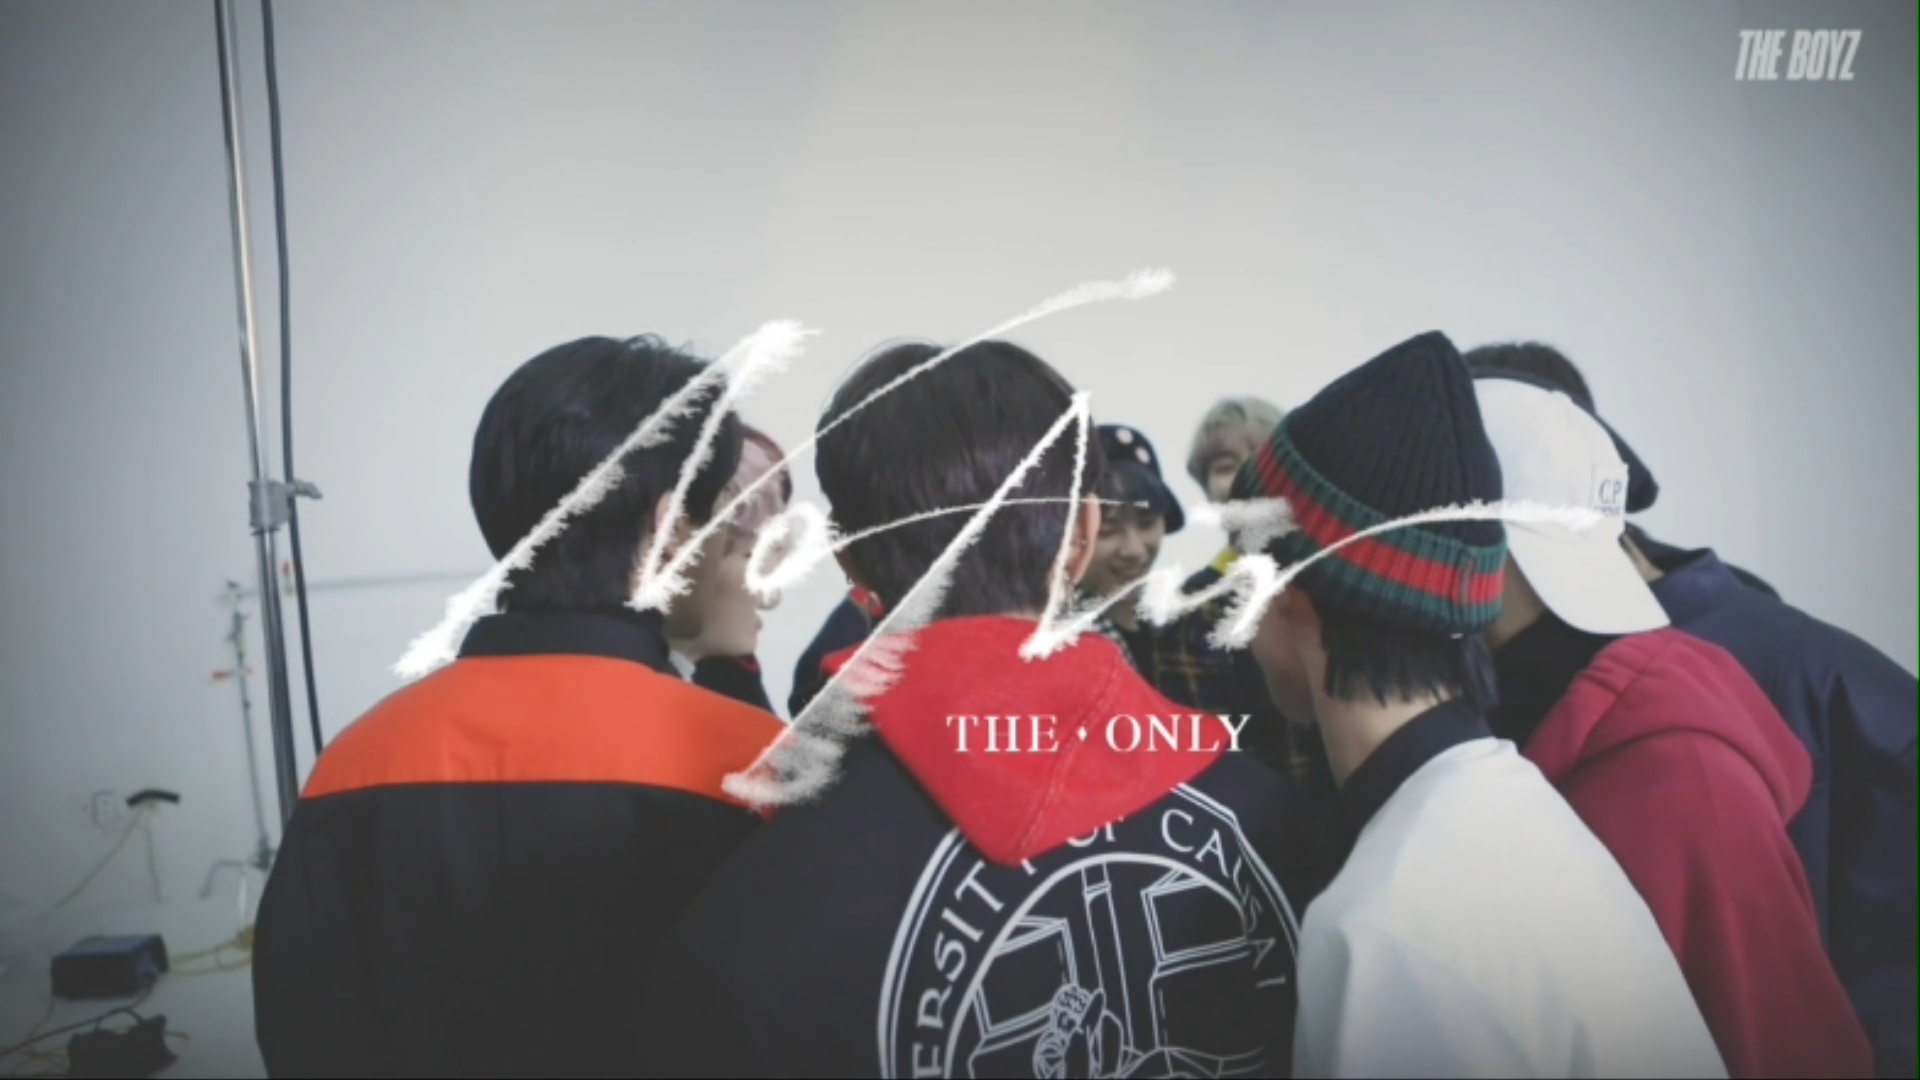 THE BOYZ (더보이즈) MINI ALBUM [THE ONLY] Jacket Making (In The Air ver.)